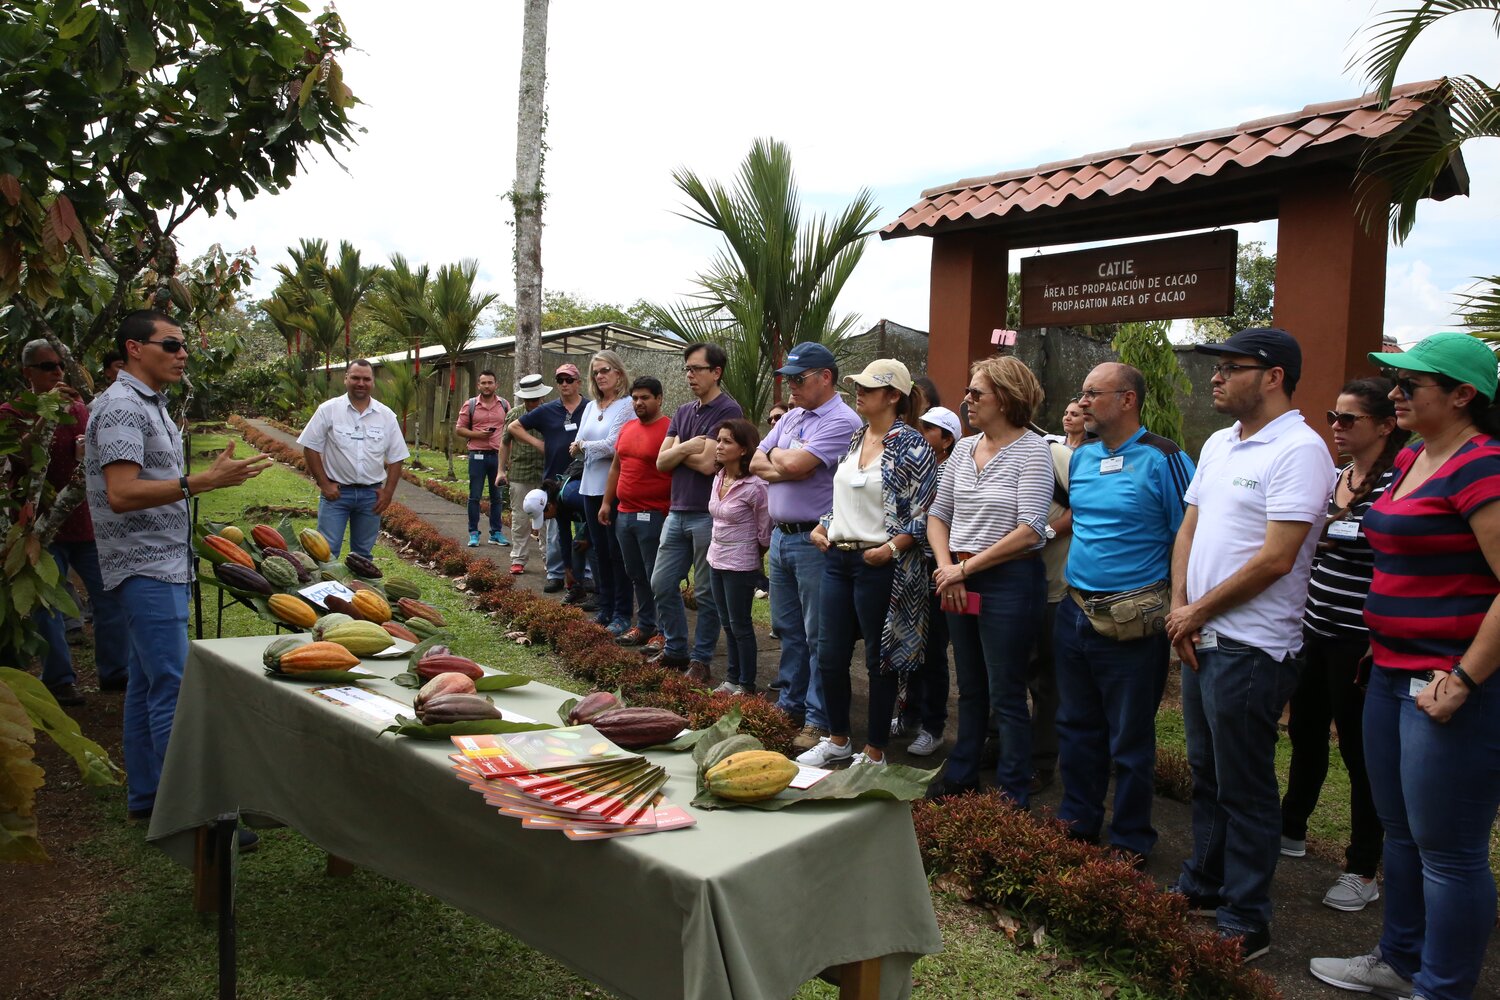 Allan Mata, from CATIE, discusses the cacao collection and how its diversity has helped the institution develop six improved varieties that have high production, good quality and tolerance to monilia, one of the most serious threats to cocoa production.